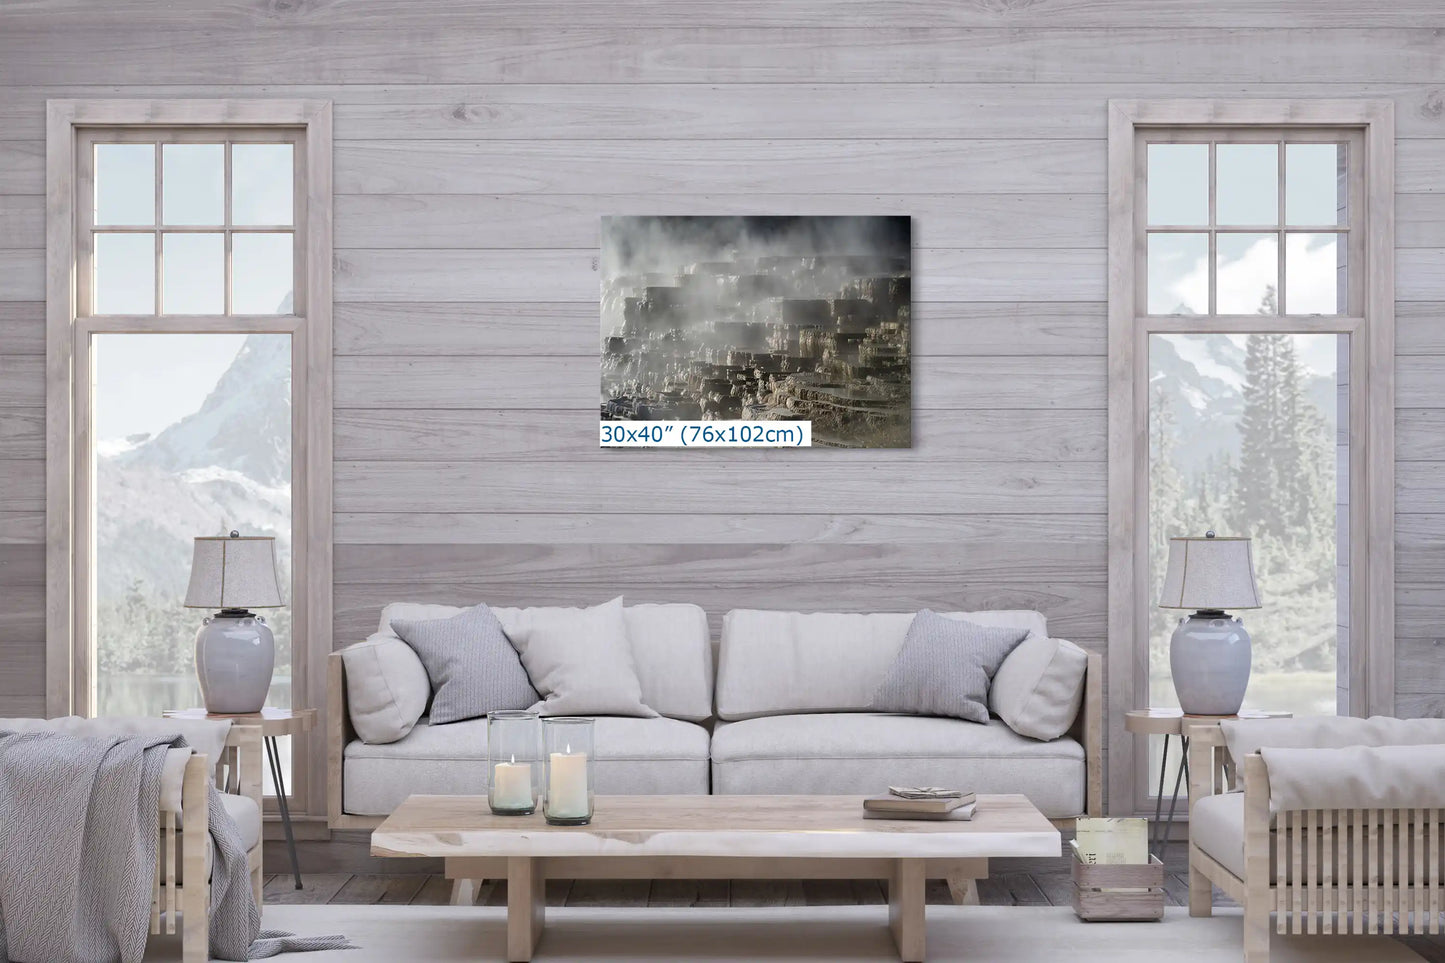 Large 30x40 inch wall art of Mammoth Hot Springs Terraces in a living room above a gray couch, adding a focal point.